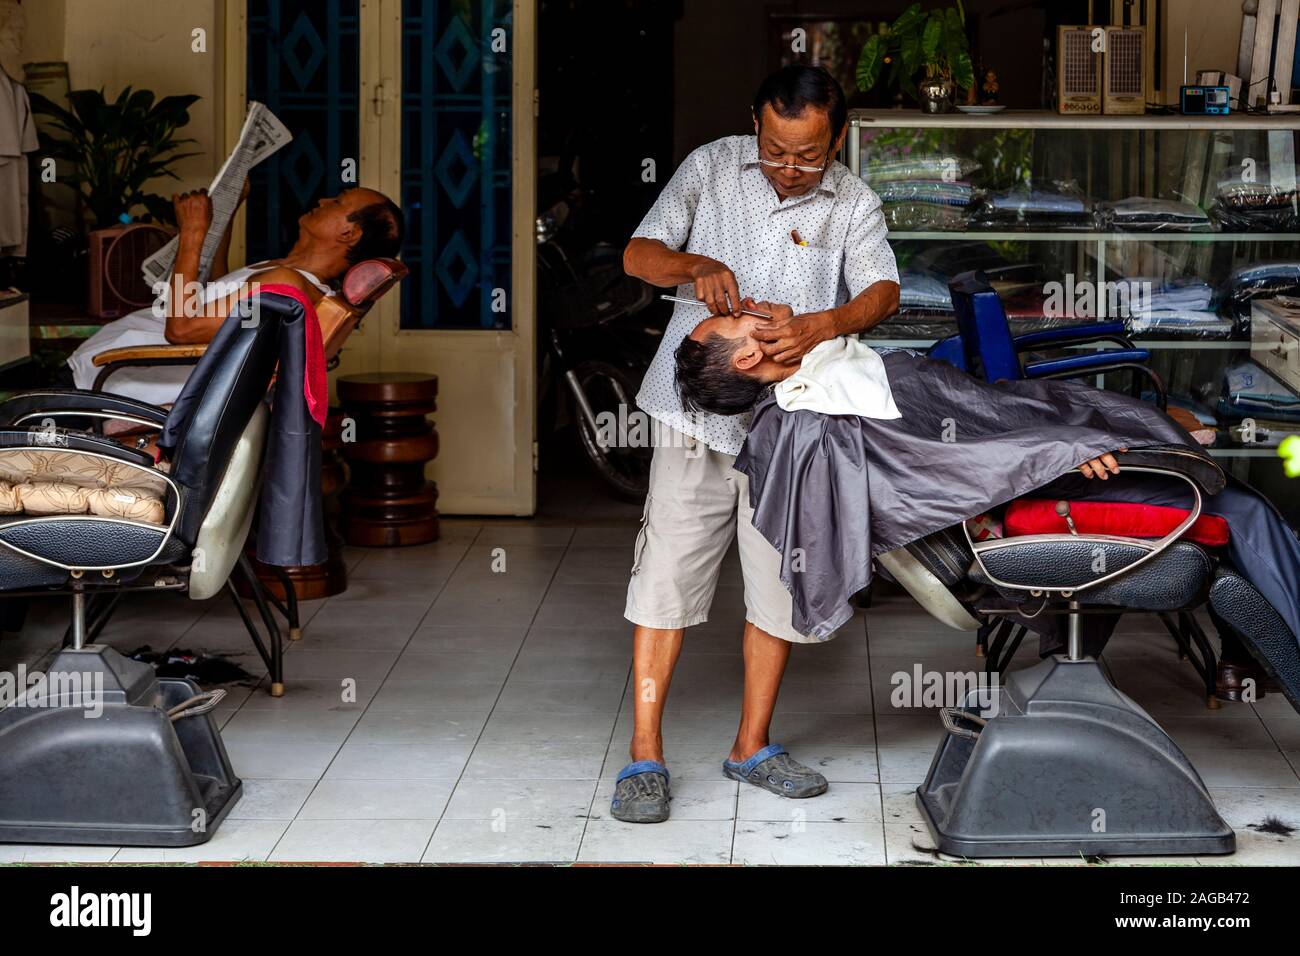 A Man Having A Wet Shave In A Barber Shop, Phnom Penh, Cambodia. Stock Photo